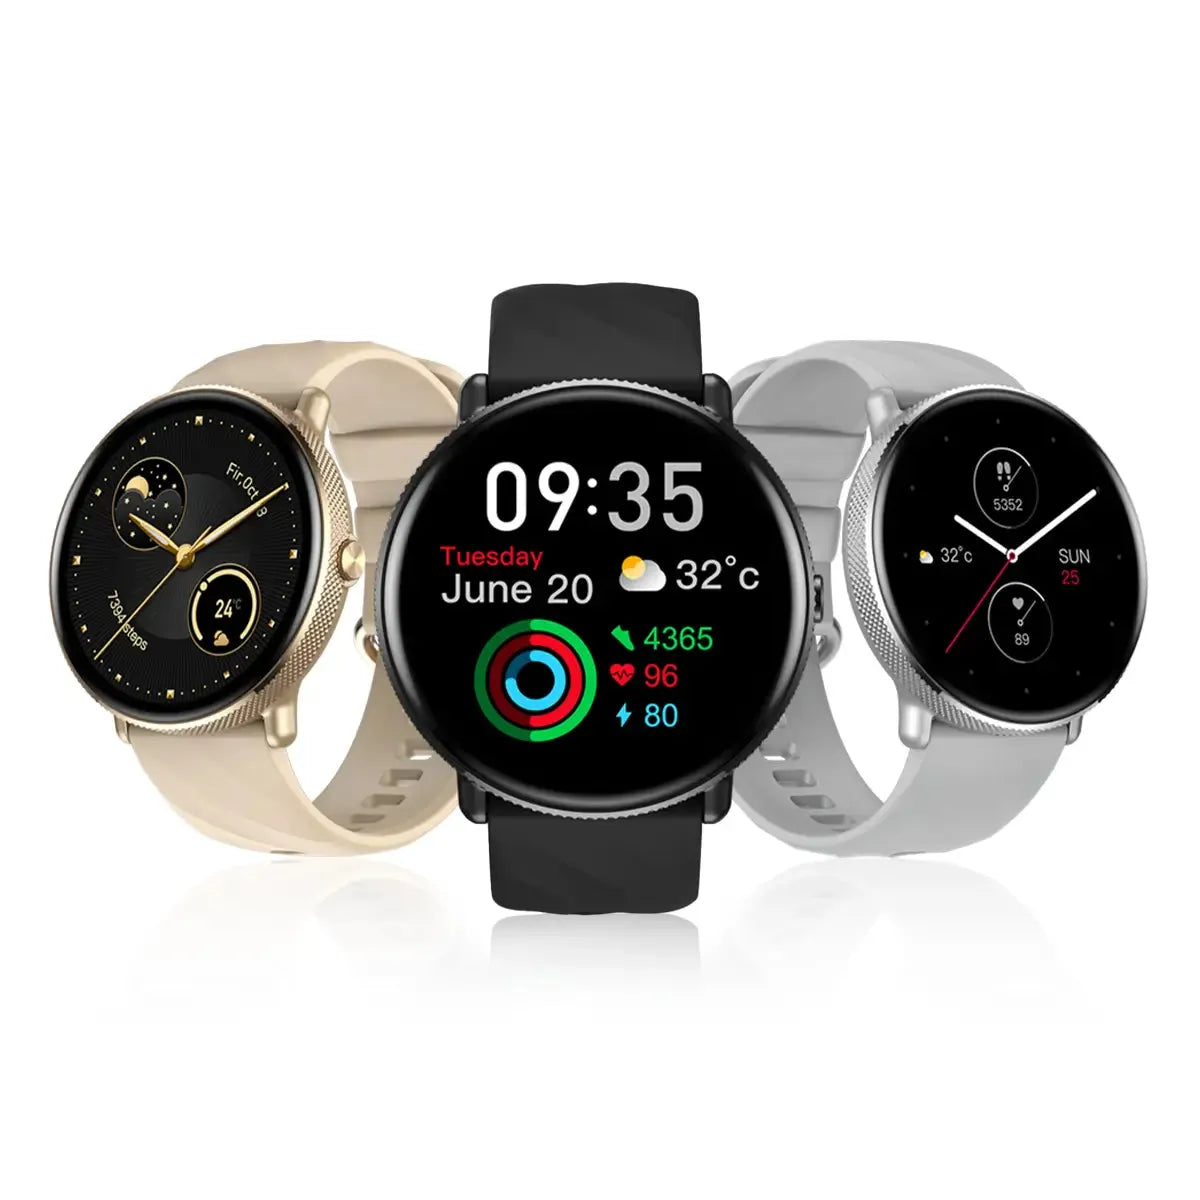 Tousains smartwatch P2 in three colors